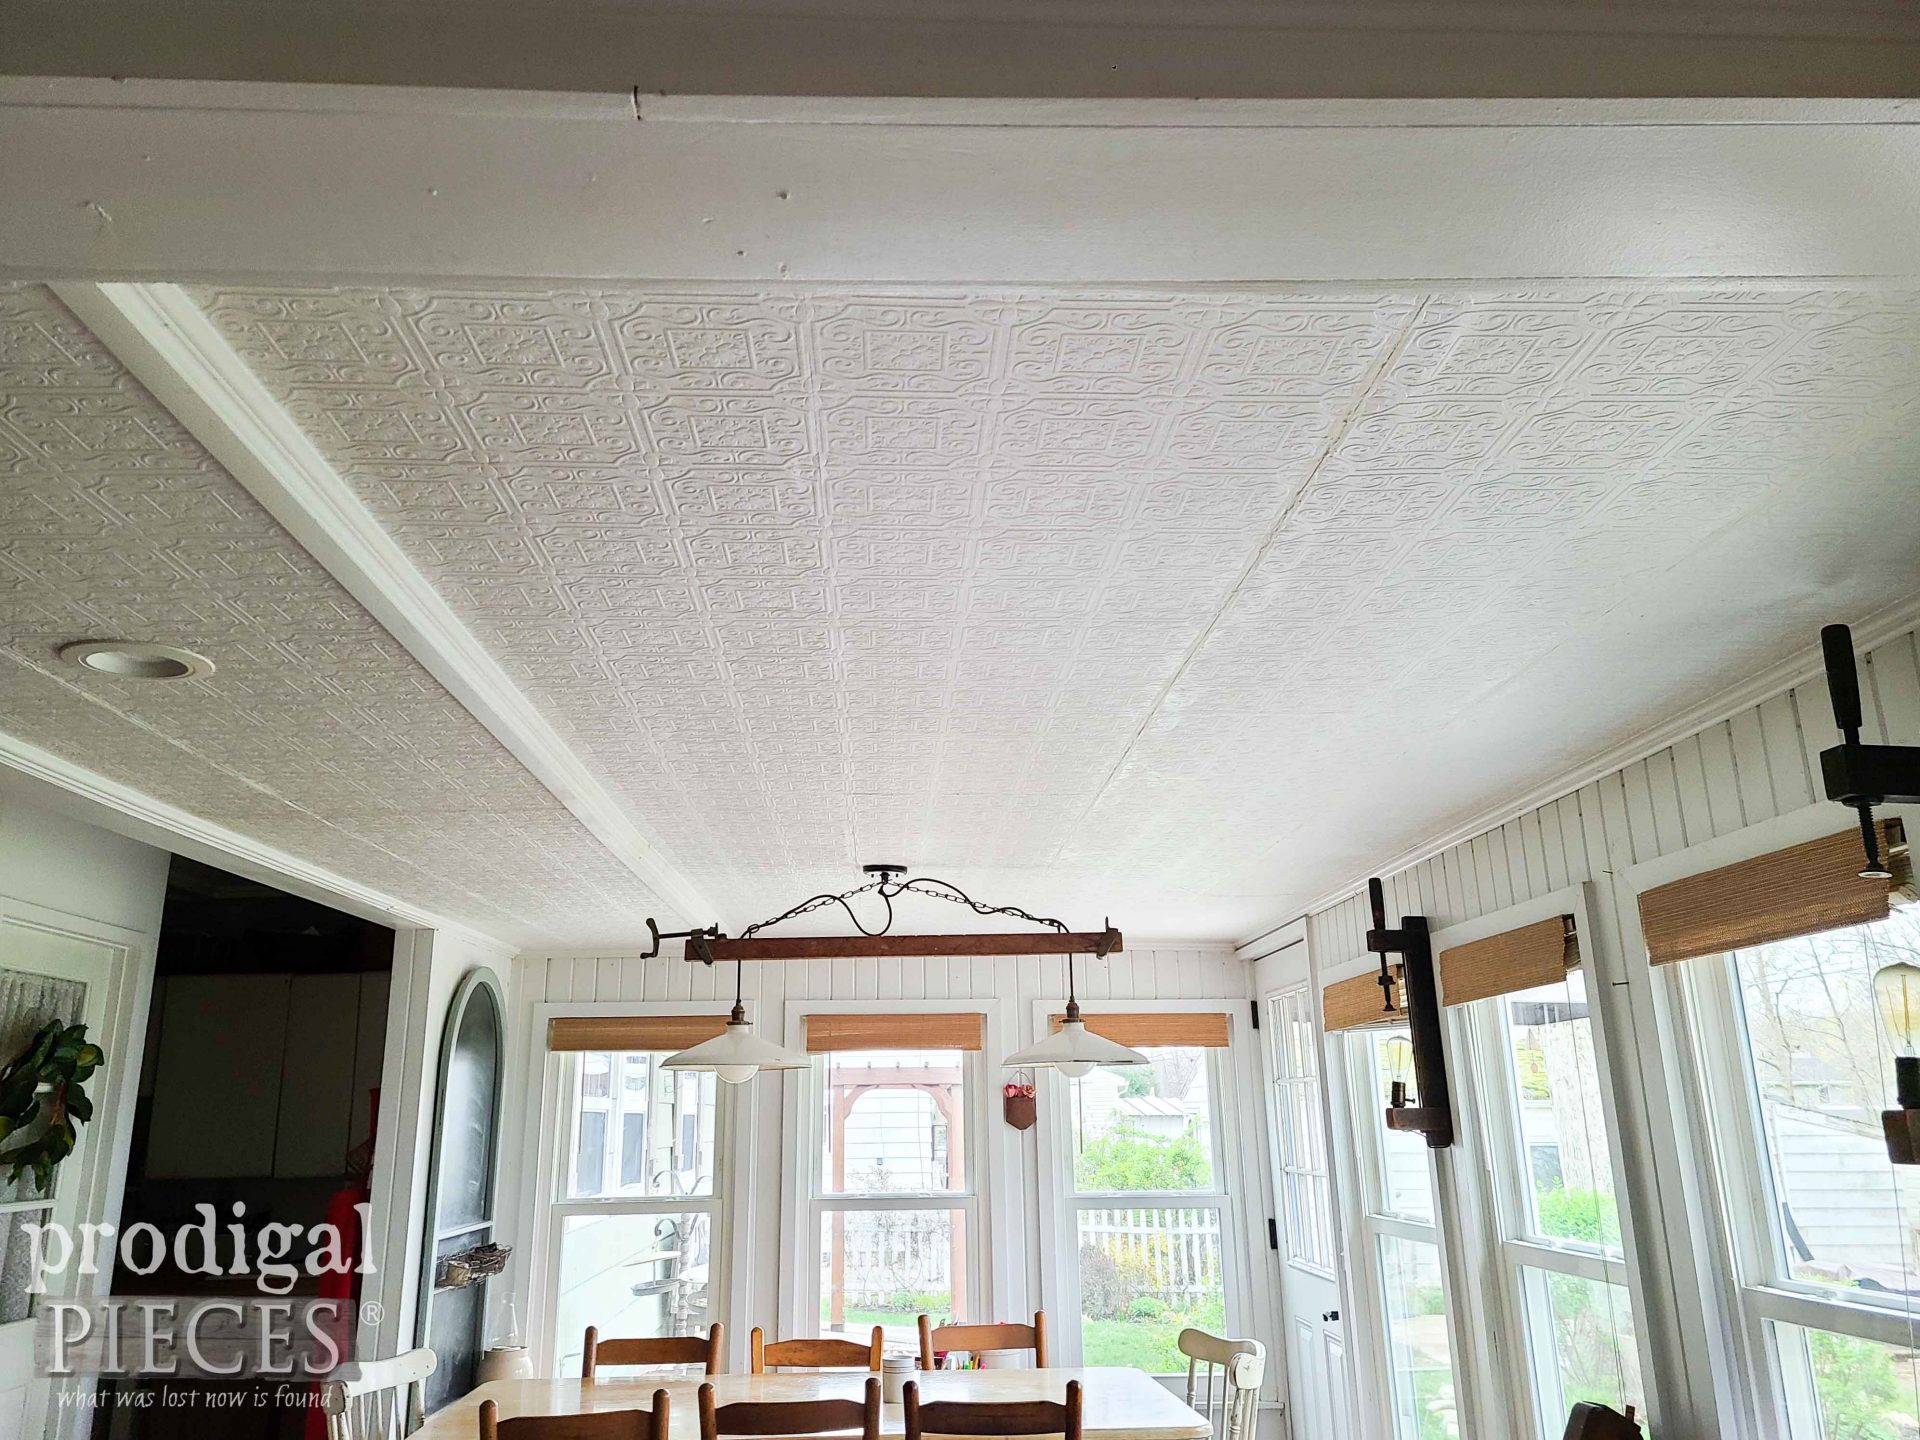 Dining Room Ceiling Before Remodel | prodigalpieces.com #prodigalpieces